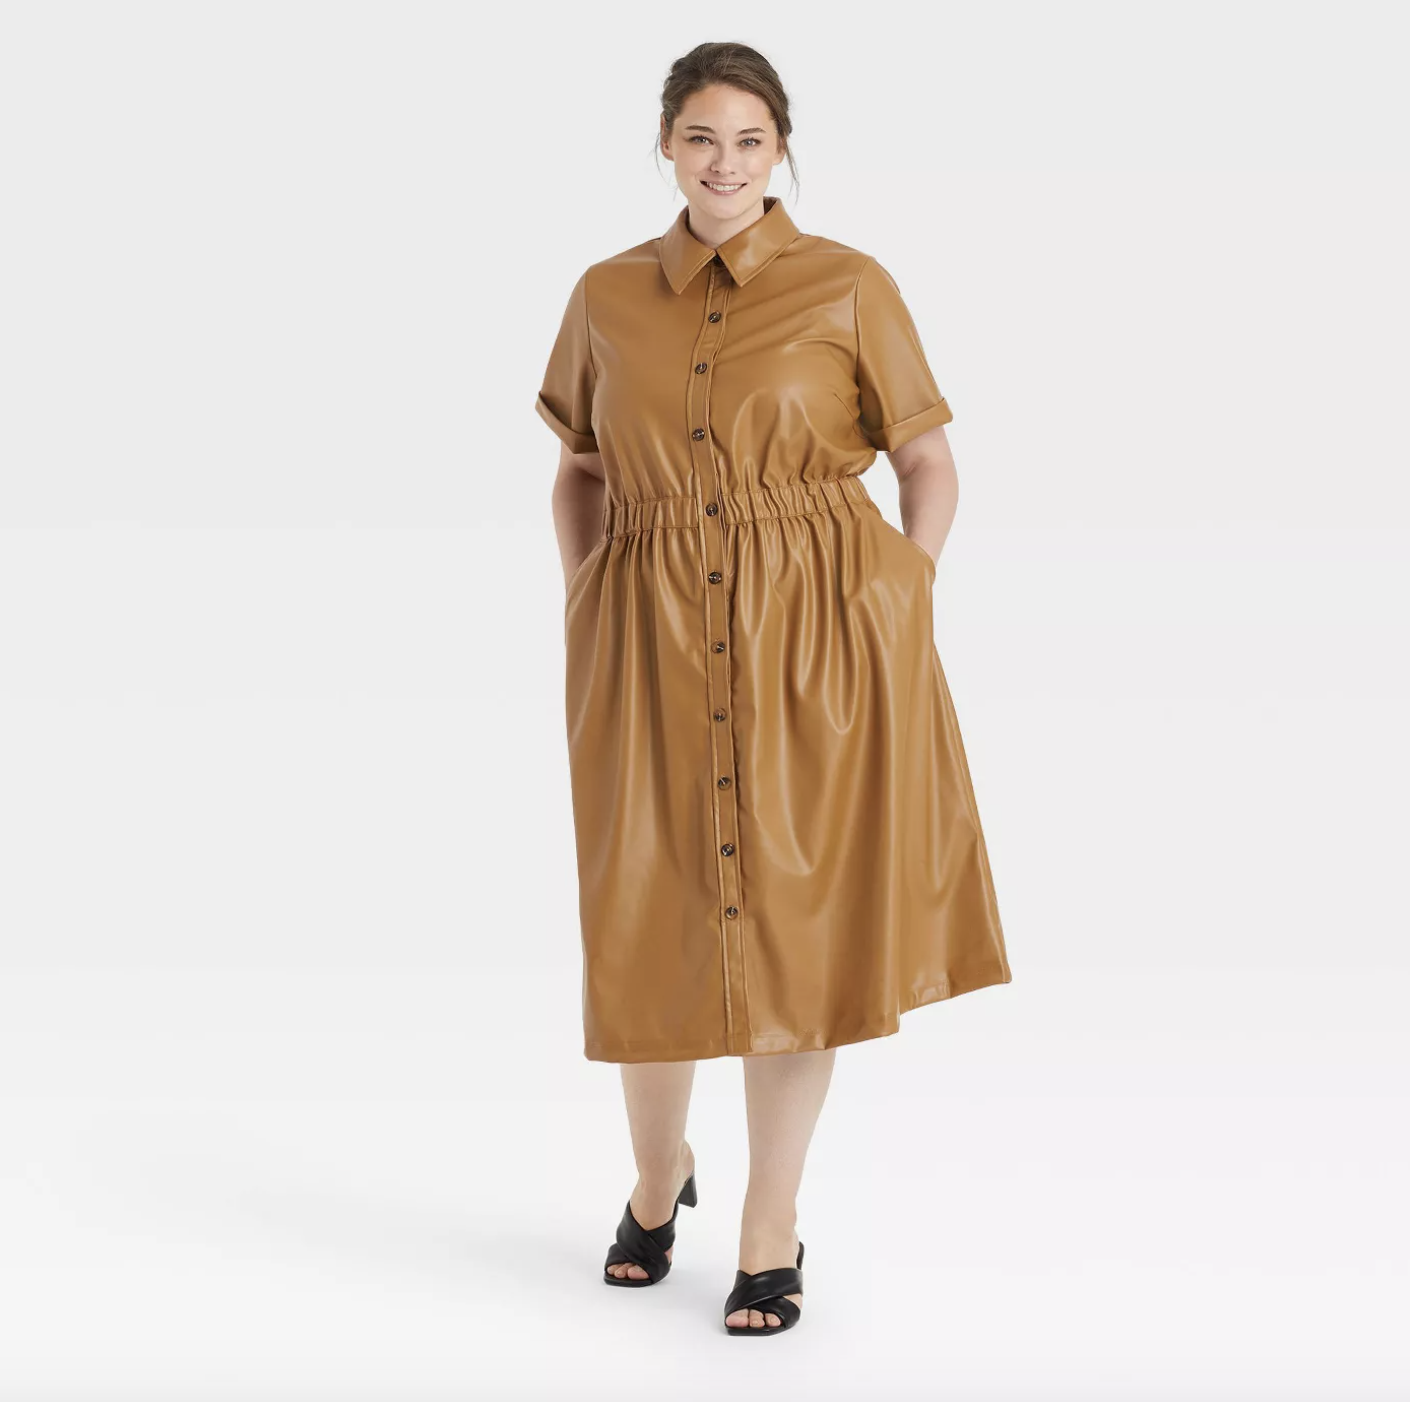 model in knee length shirt dress silhouette light brown faux leather dress